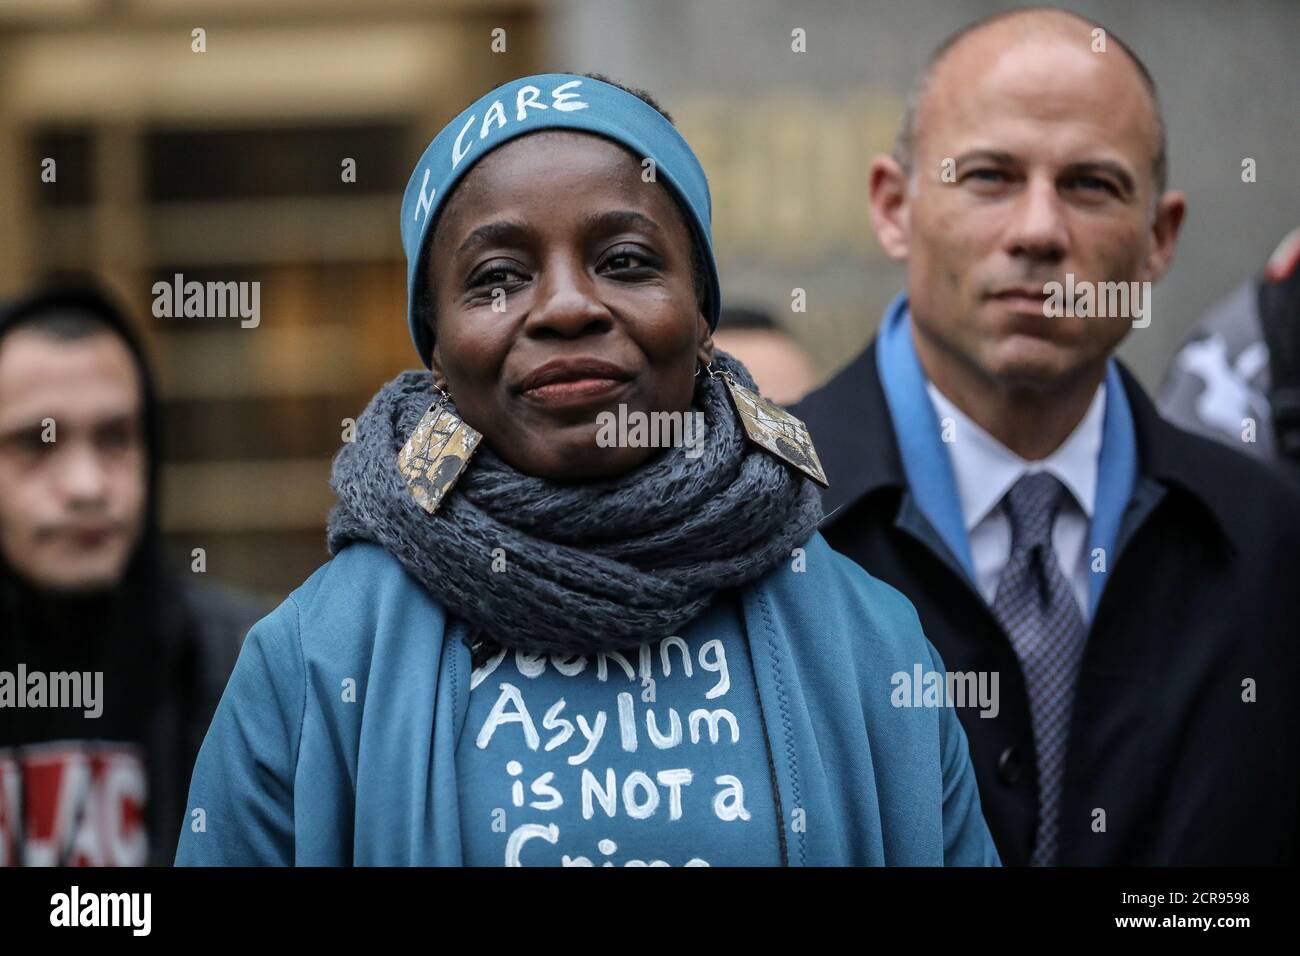 Therese Okoumou, Statue of Liberty climber, is seen at the United States Courthouse in the Manhattan borough of New York City, New York, U.S., December 17, 2018. REUTERS/Jeenah Moon Stock Photo